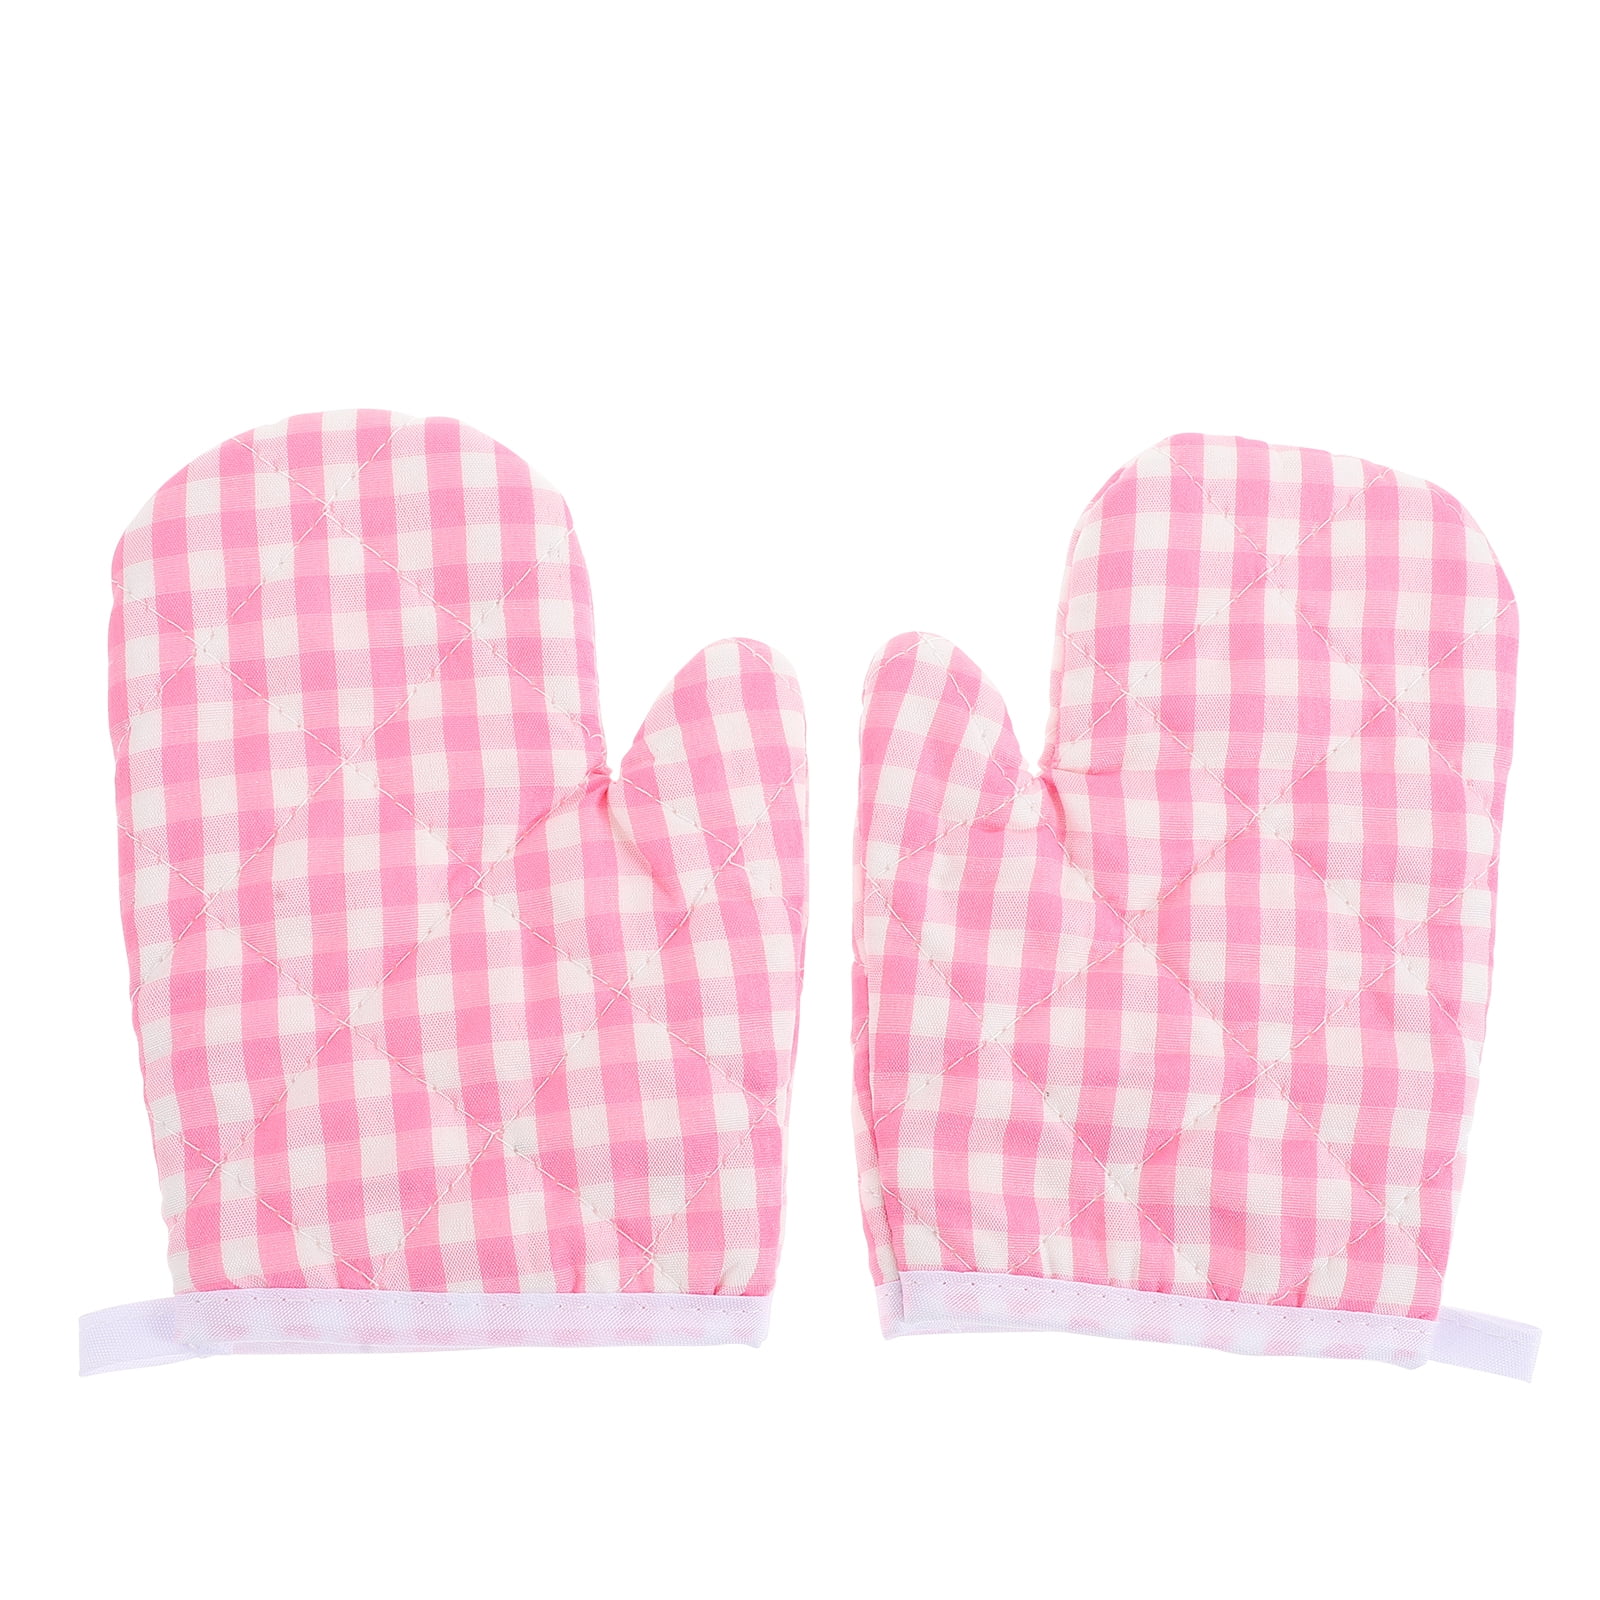  DOITOOL 2Pcs Kids Oven Mitts Heat Resistant for Children Play  Kitchen, Anti- Scald Gloves Microwave Oven Gloves Kitchen Mitts for Kids  Toddler Safe Baking Cooking ( Red Checkered ) : Home